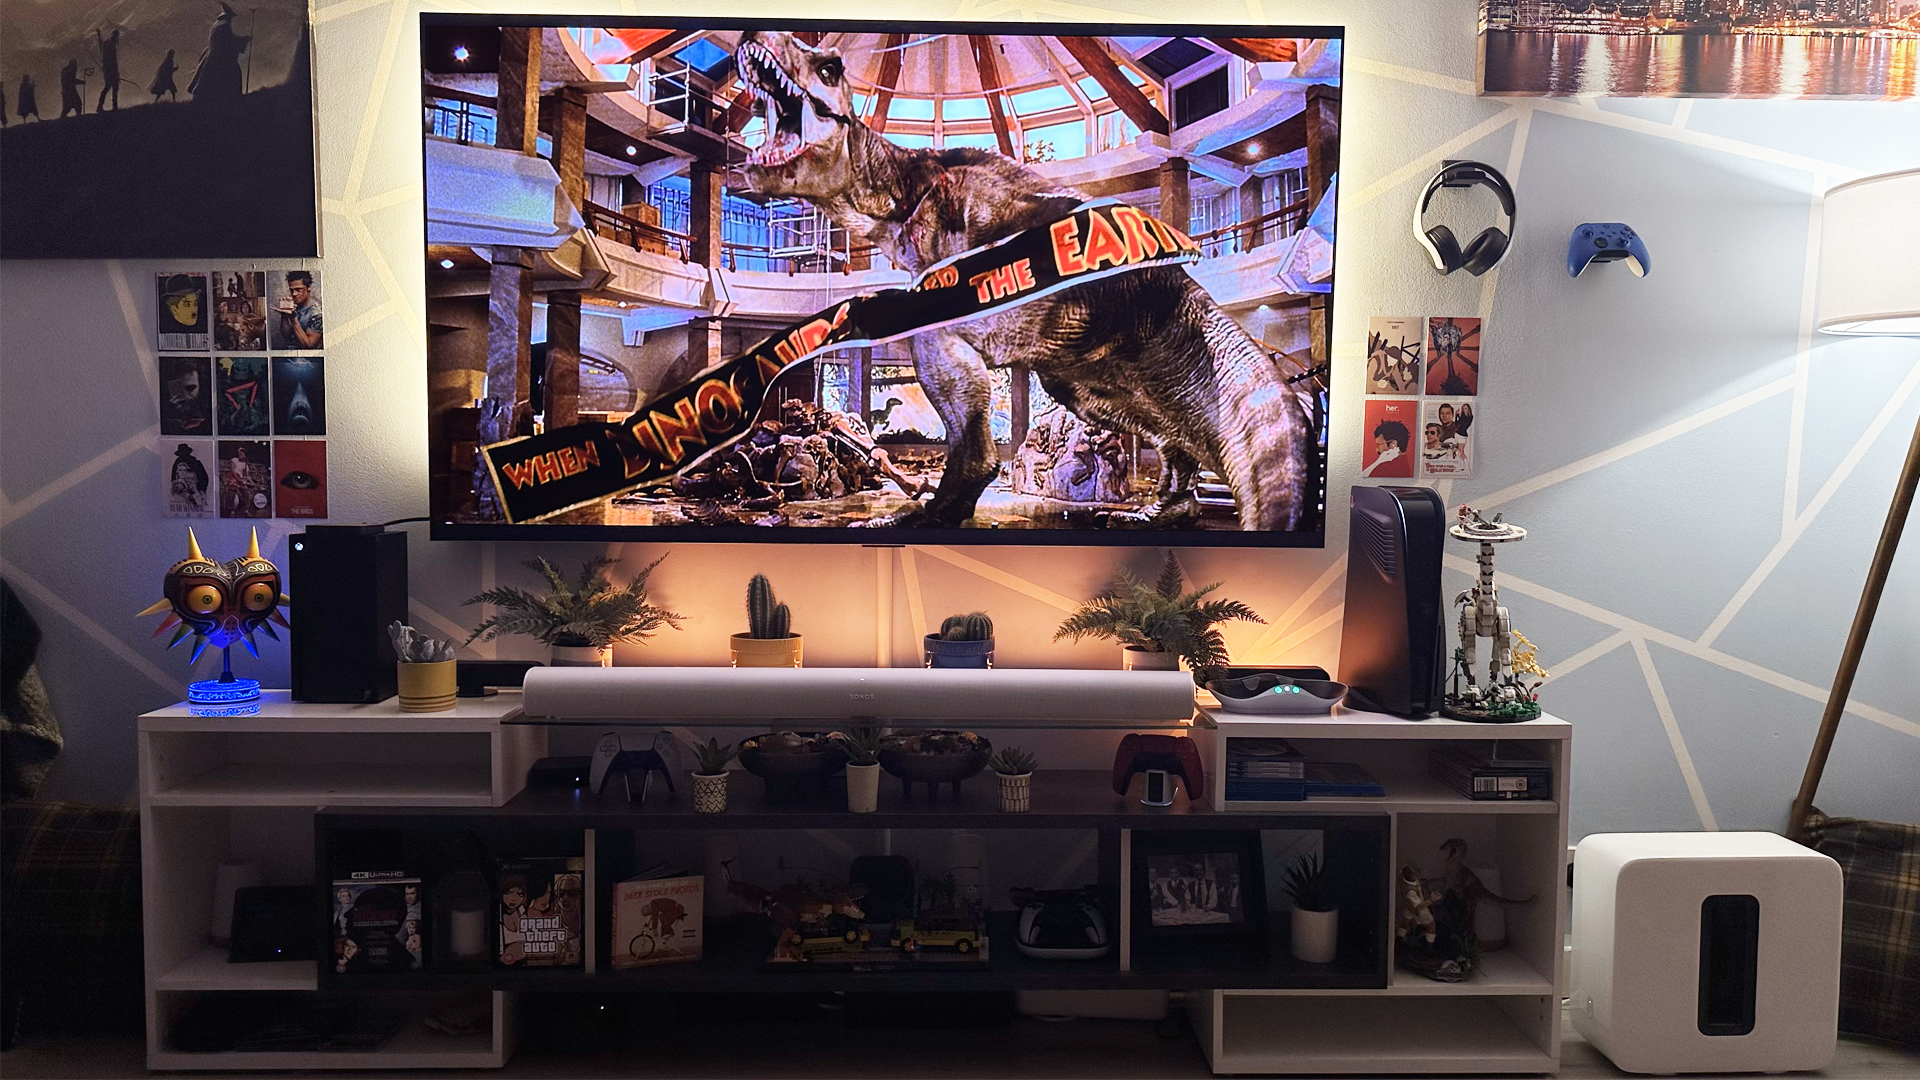 An LG G3 TV showing the movie Jurassic Park with a Sonos Sub nearby